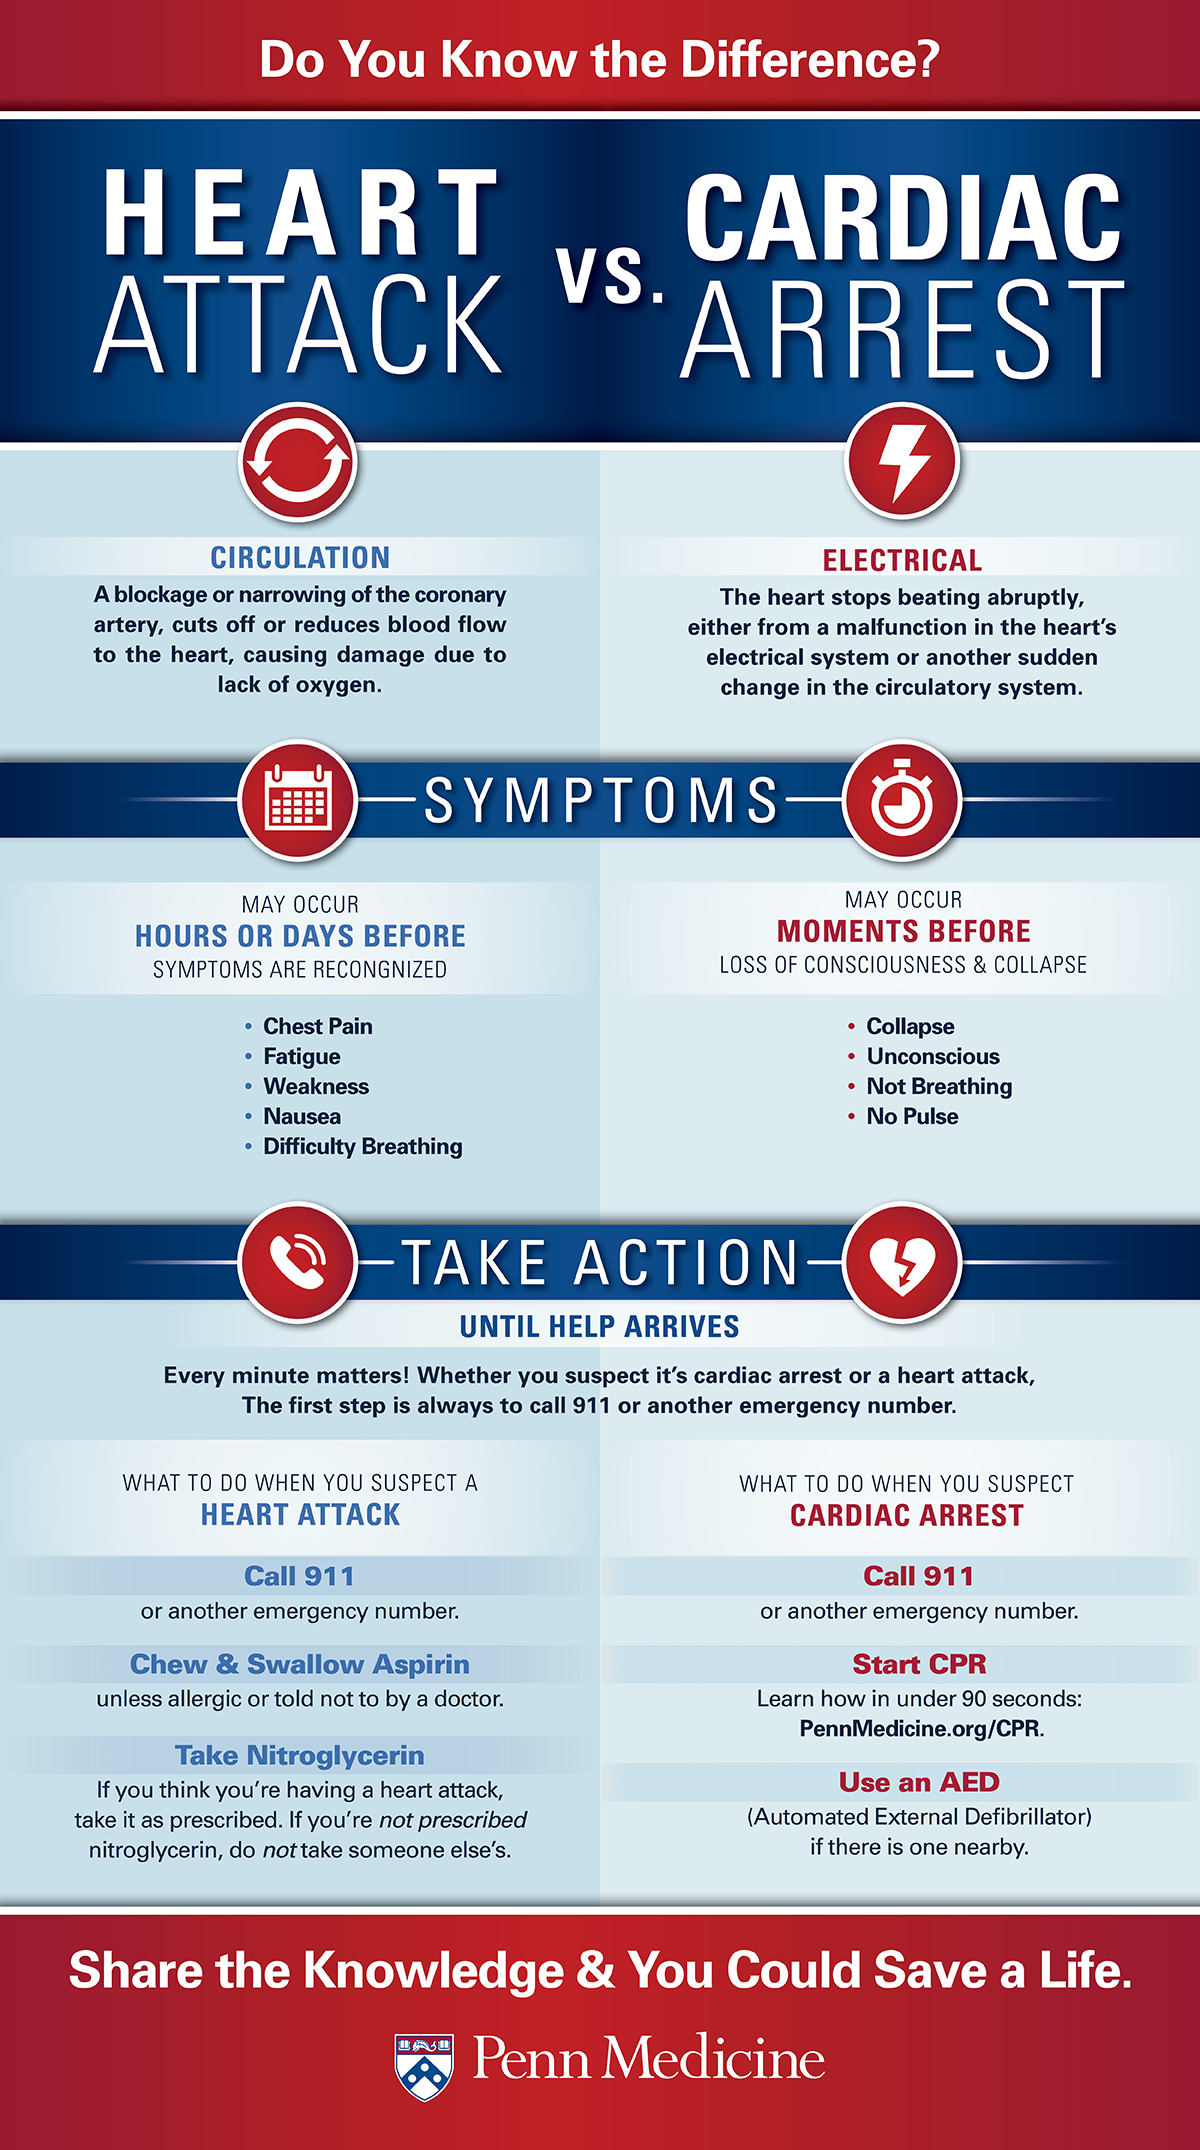 heart_attack_versus_cardiac_arrest_difference_between_infographic.ashx